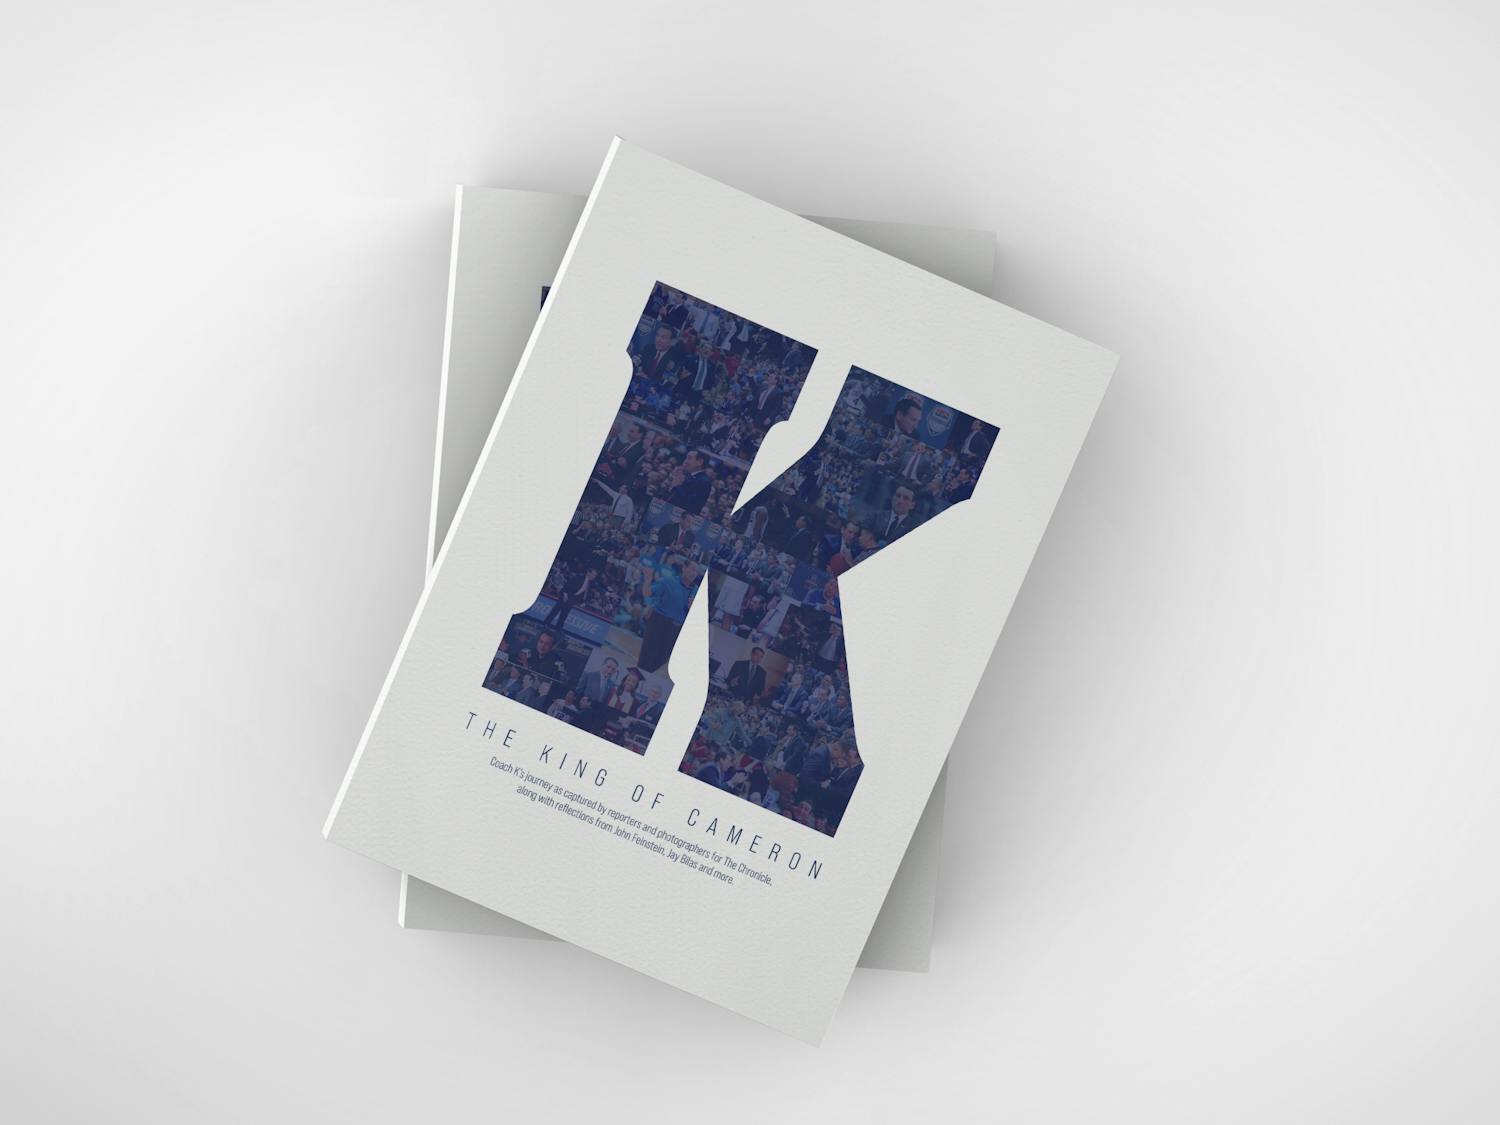 The 136-page paperback book covers every milestone during Coach K’s career.